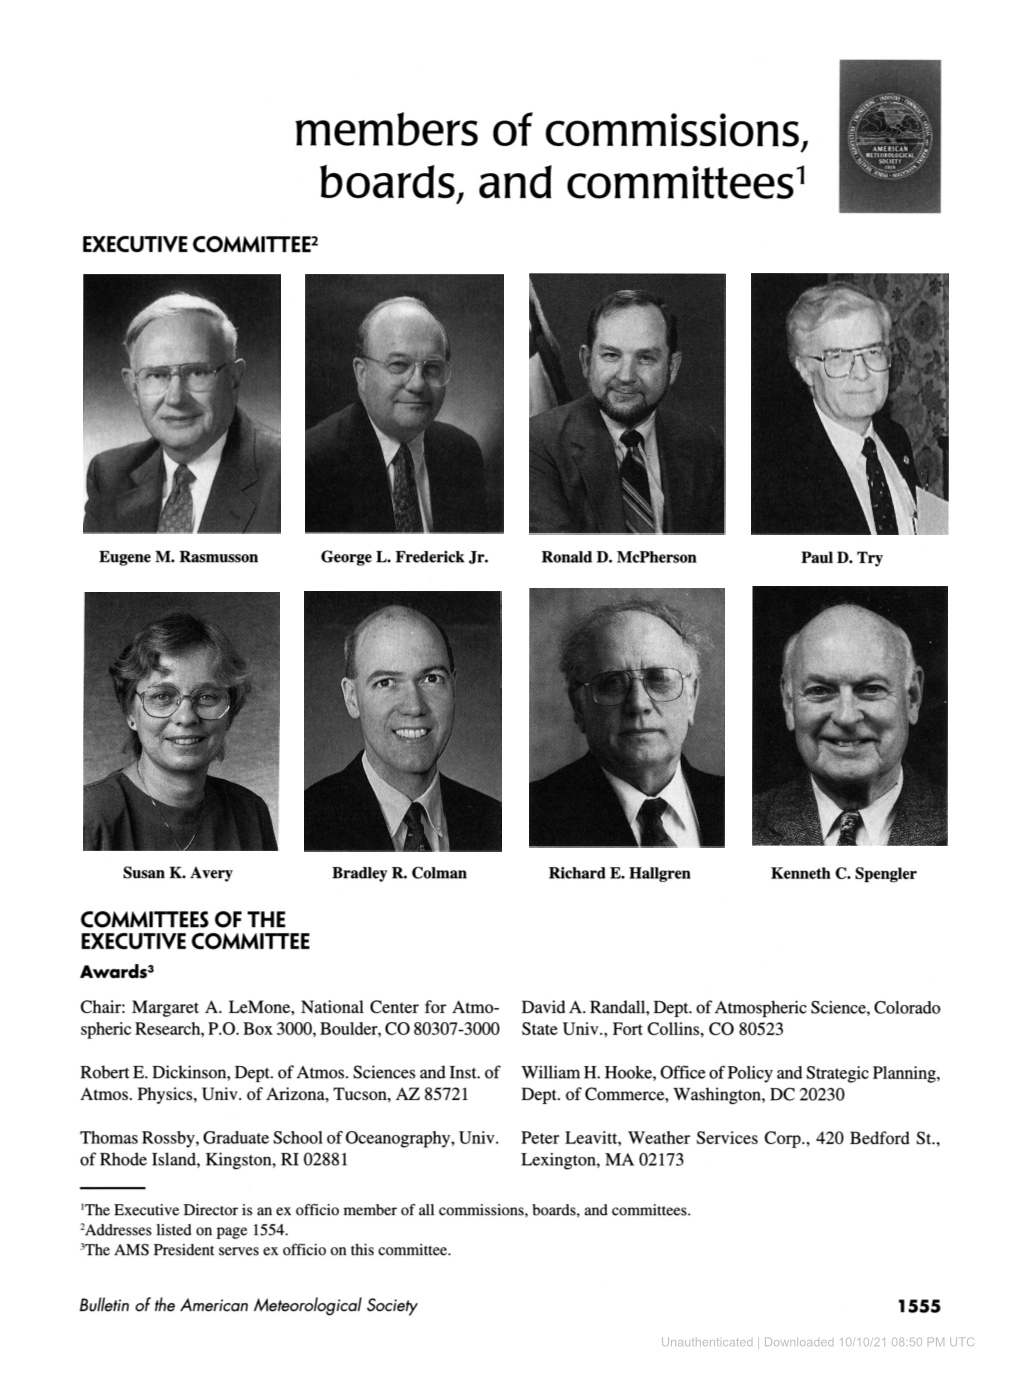 Members of Commissions, Boards, and Committees1